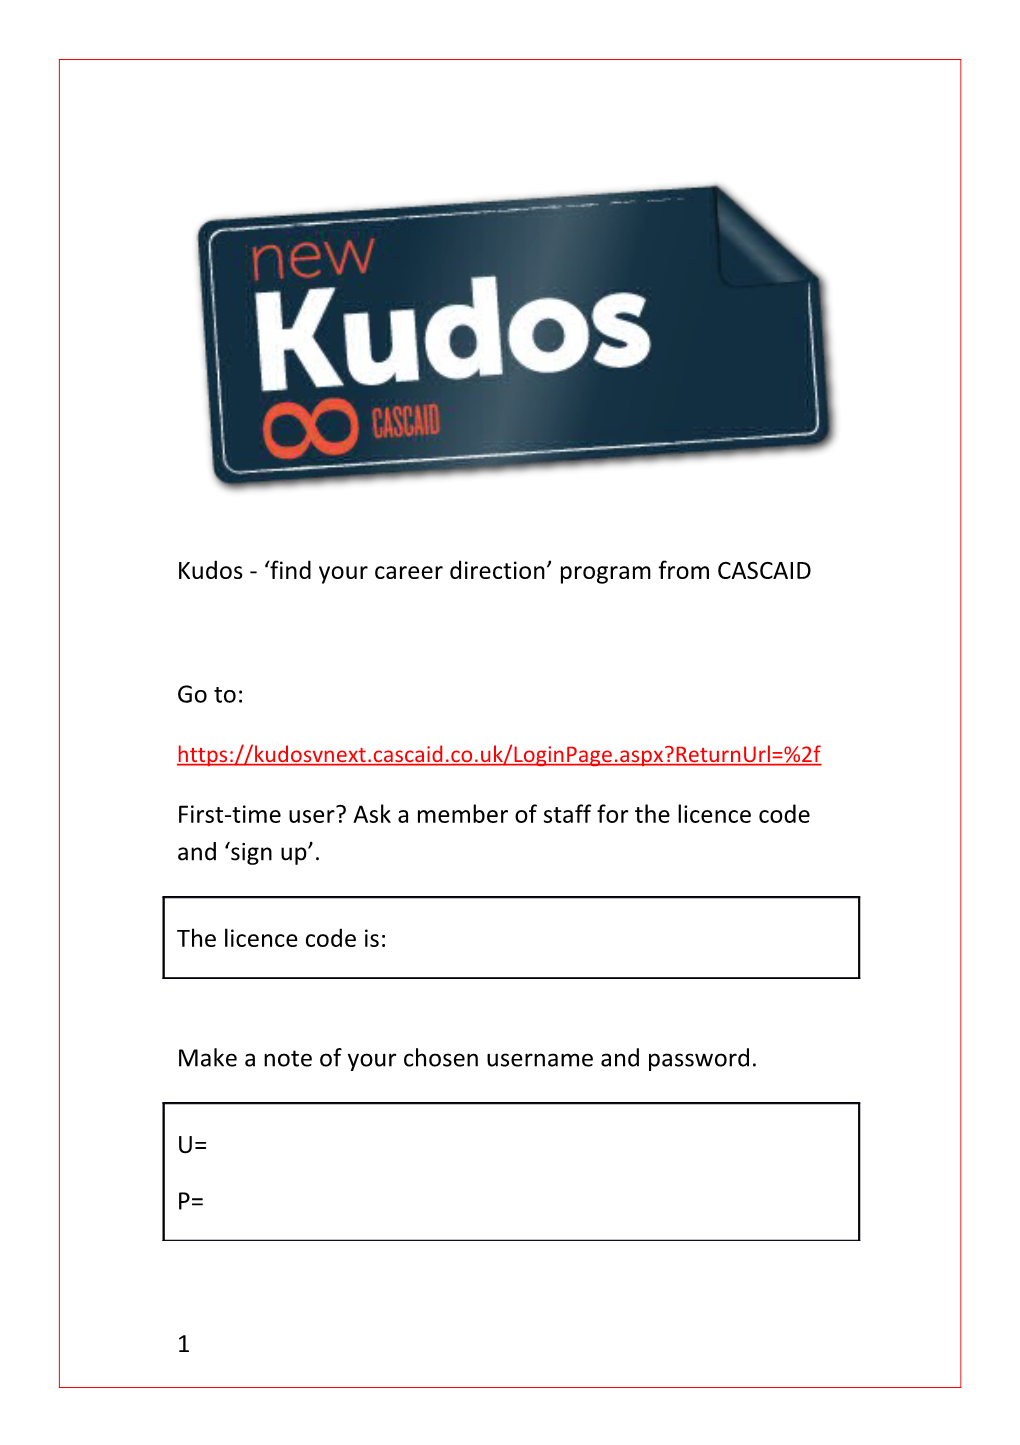 Kudos - Find Your Career Direction Program from CASCAID